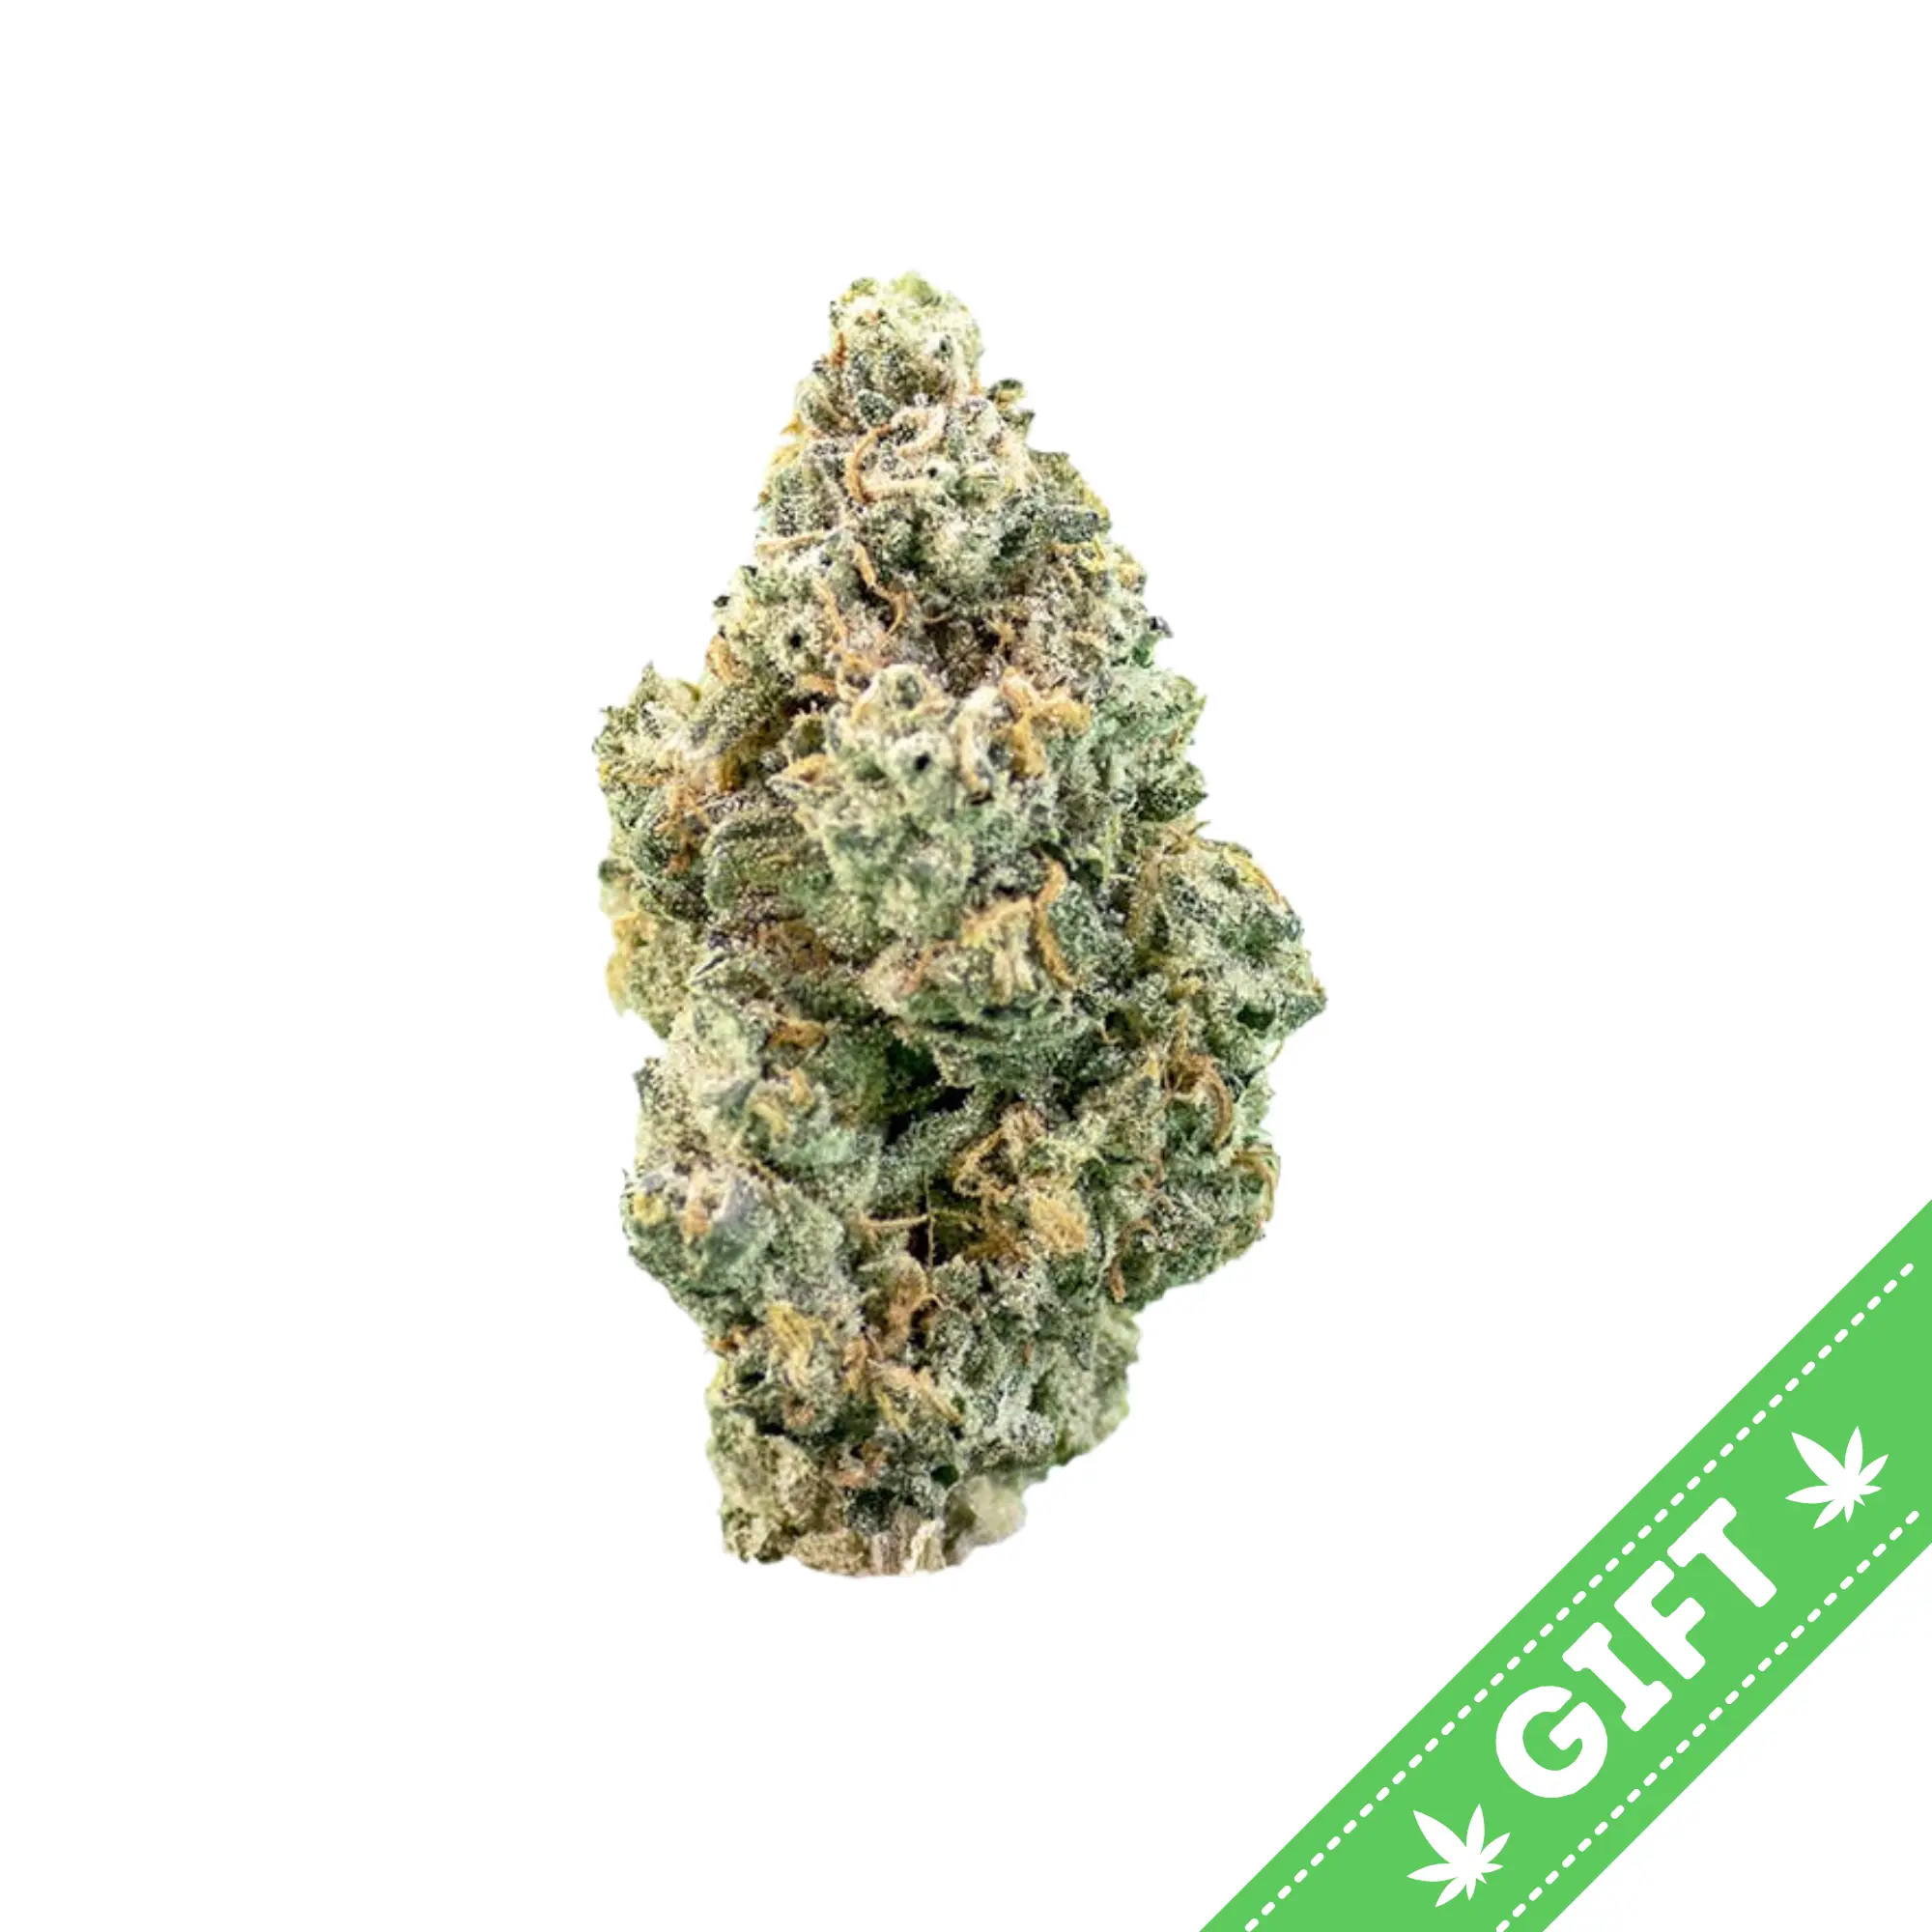 Giving Tree gifts White Miso, an indica-dominant hybrid, it's a cross between Kosher Kush BX1 and God's Breath #6, its fruit-forward flavor has tones of citrus and herbs that taste like fruit of the gods.